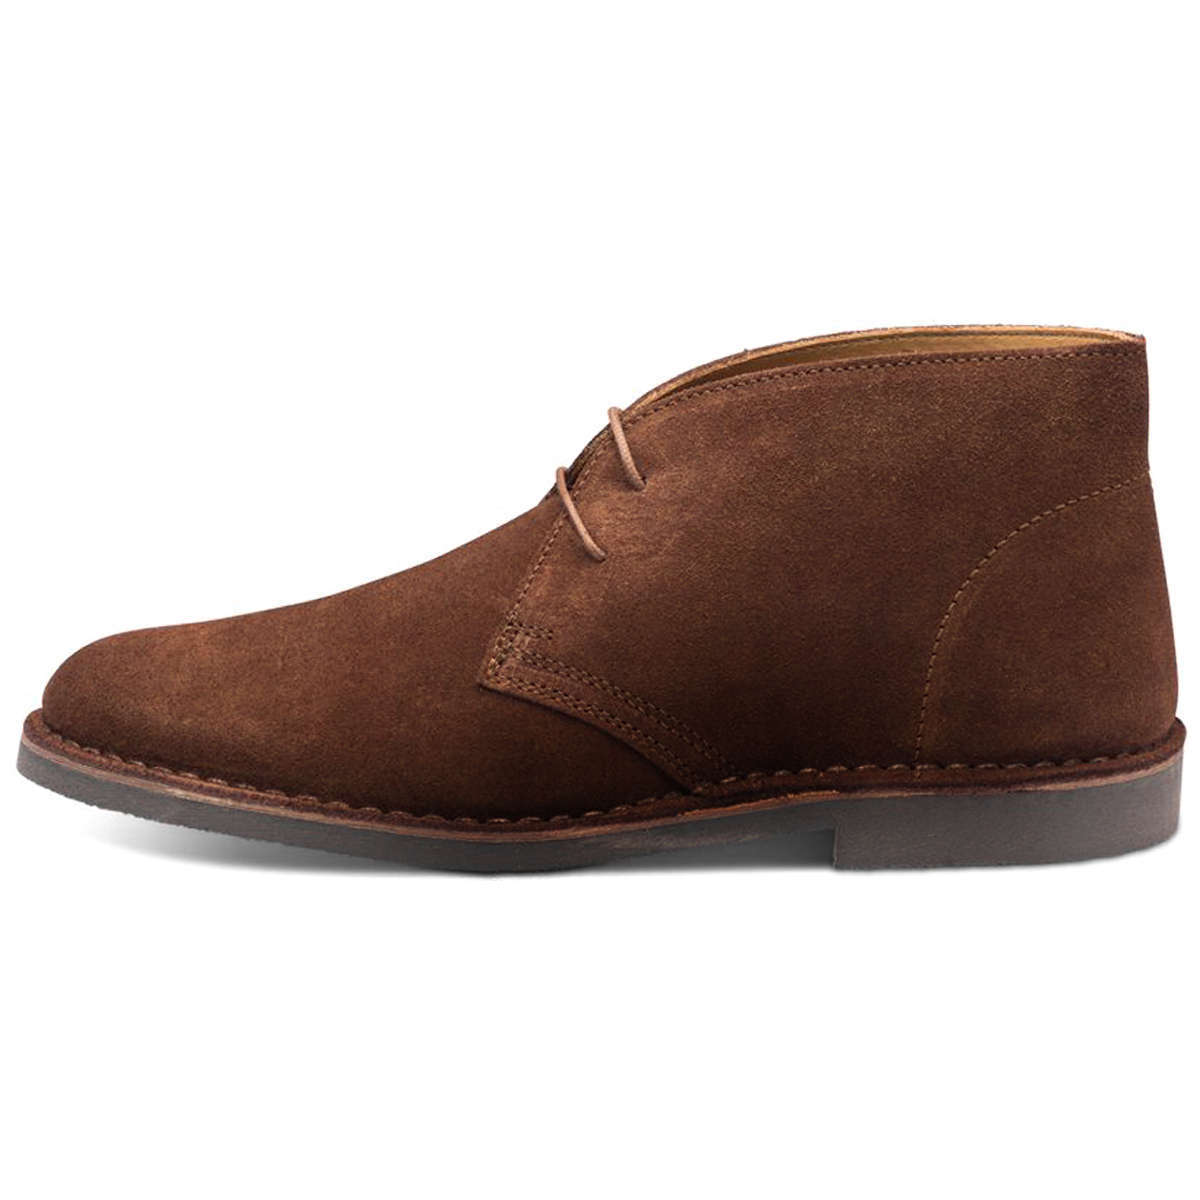 Loake Sahara Suede Leather Men's Desert Boots#color_brown